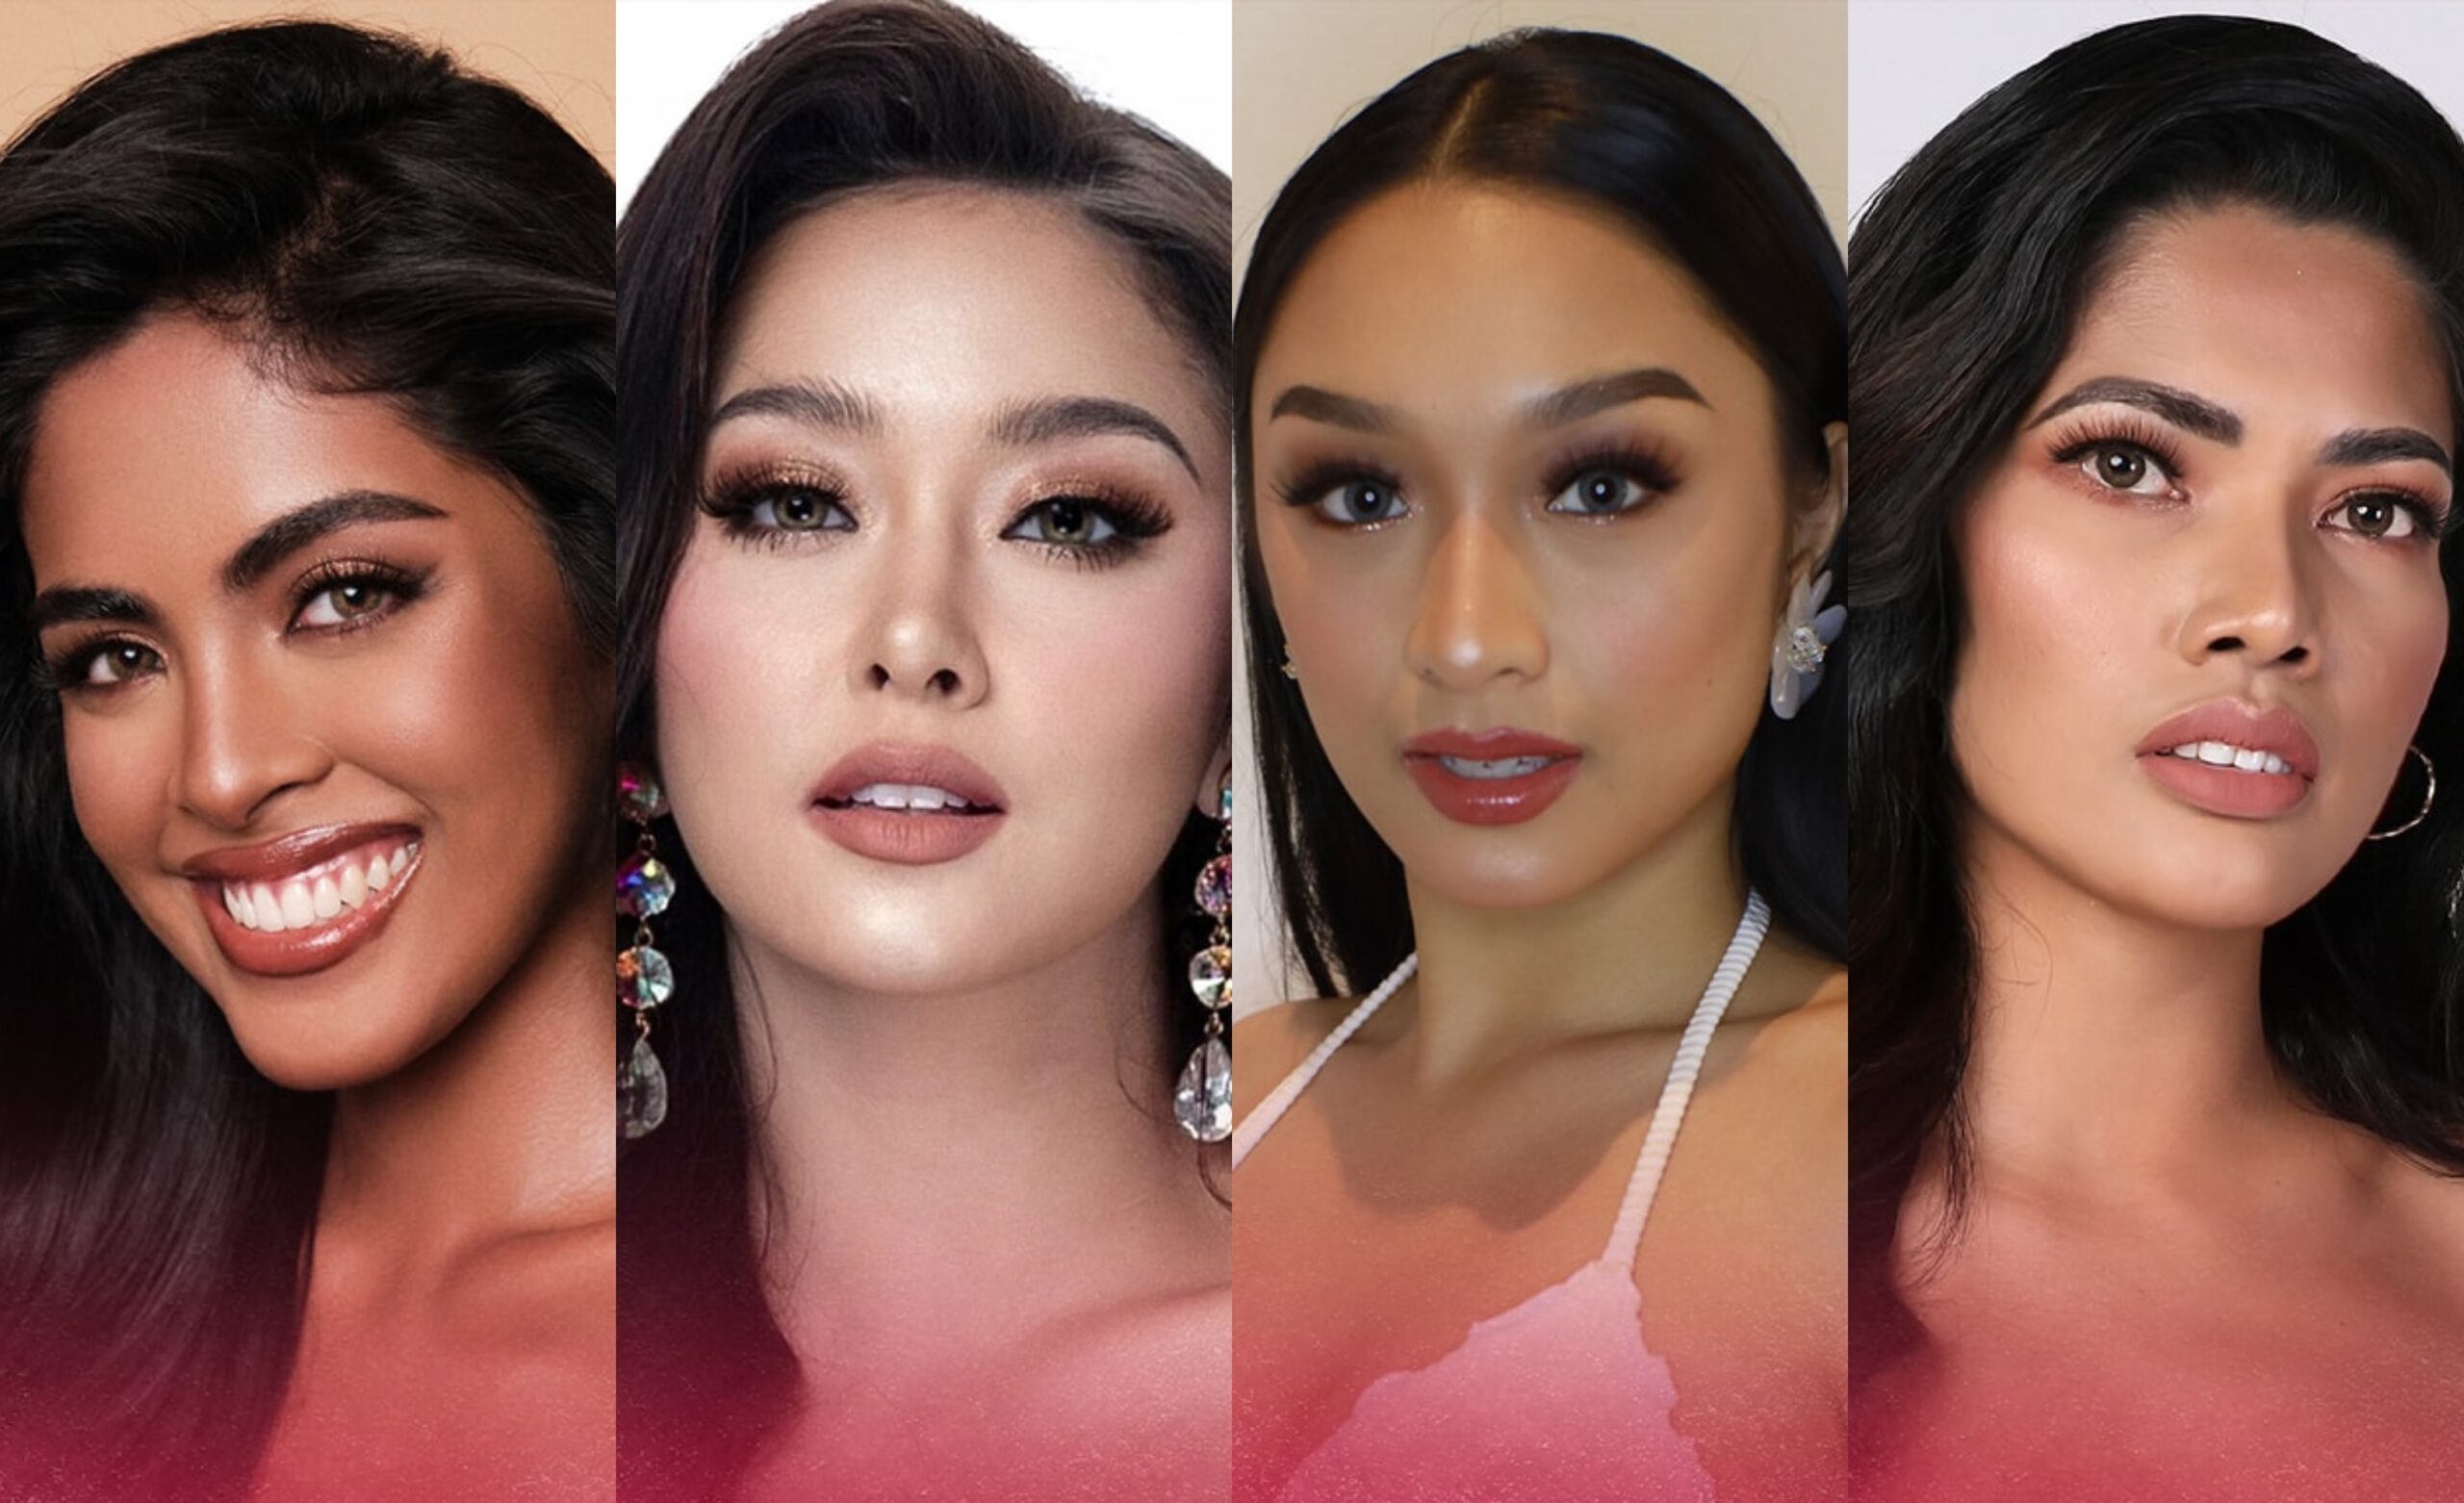 IN PHOTOS: The Binibining Pilipinas 2023 Top 40 candidates